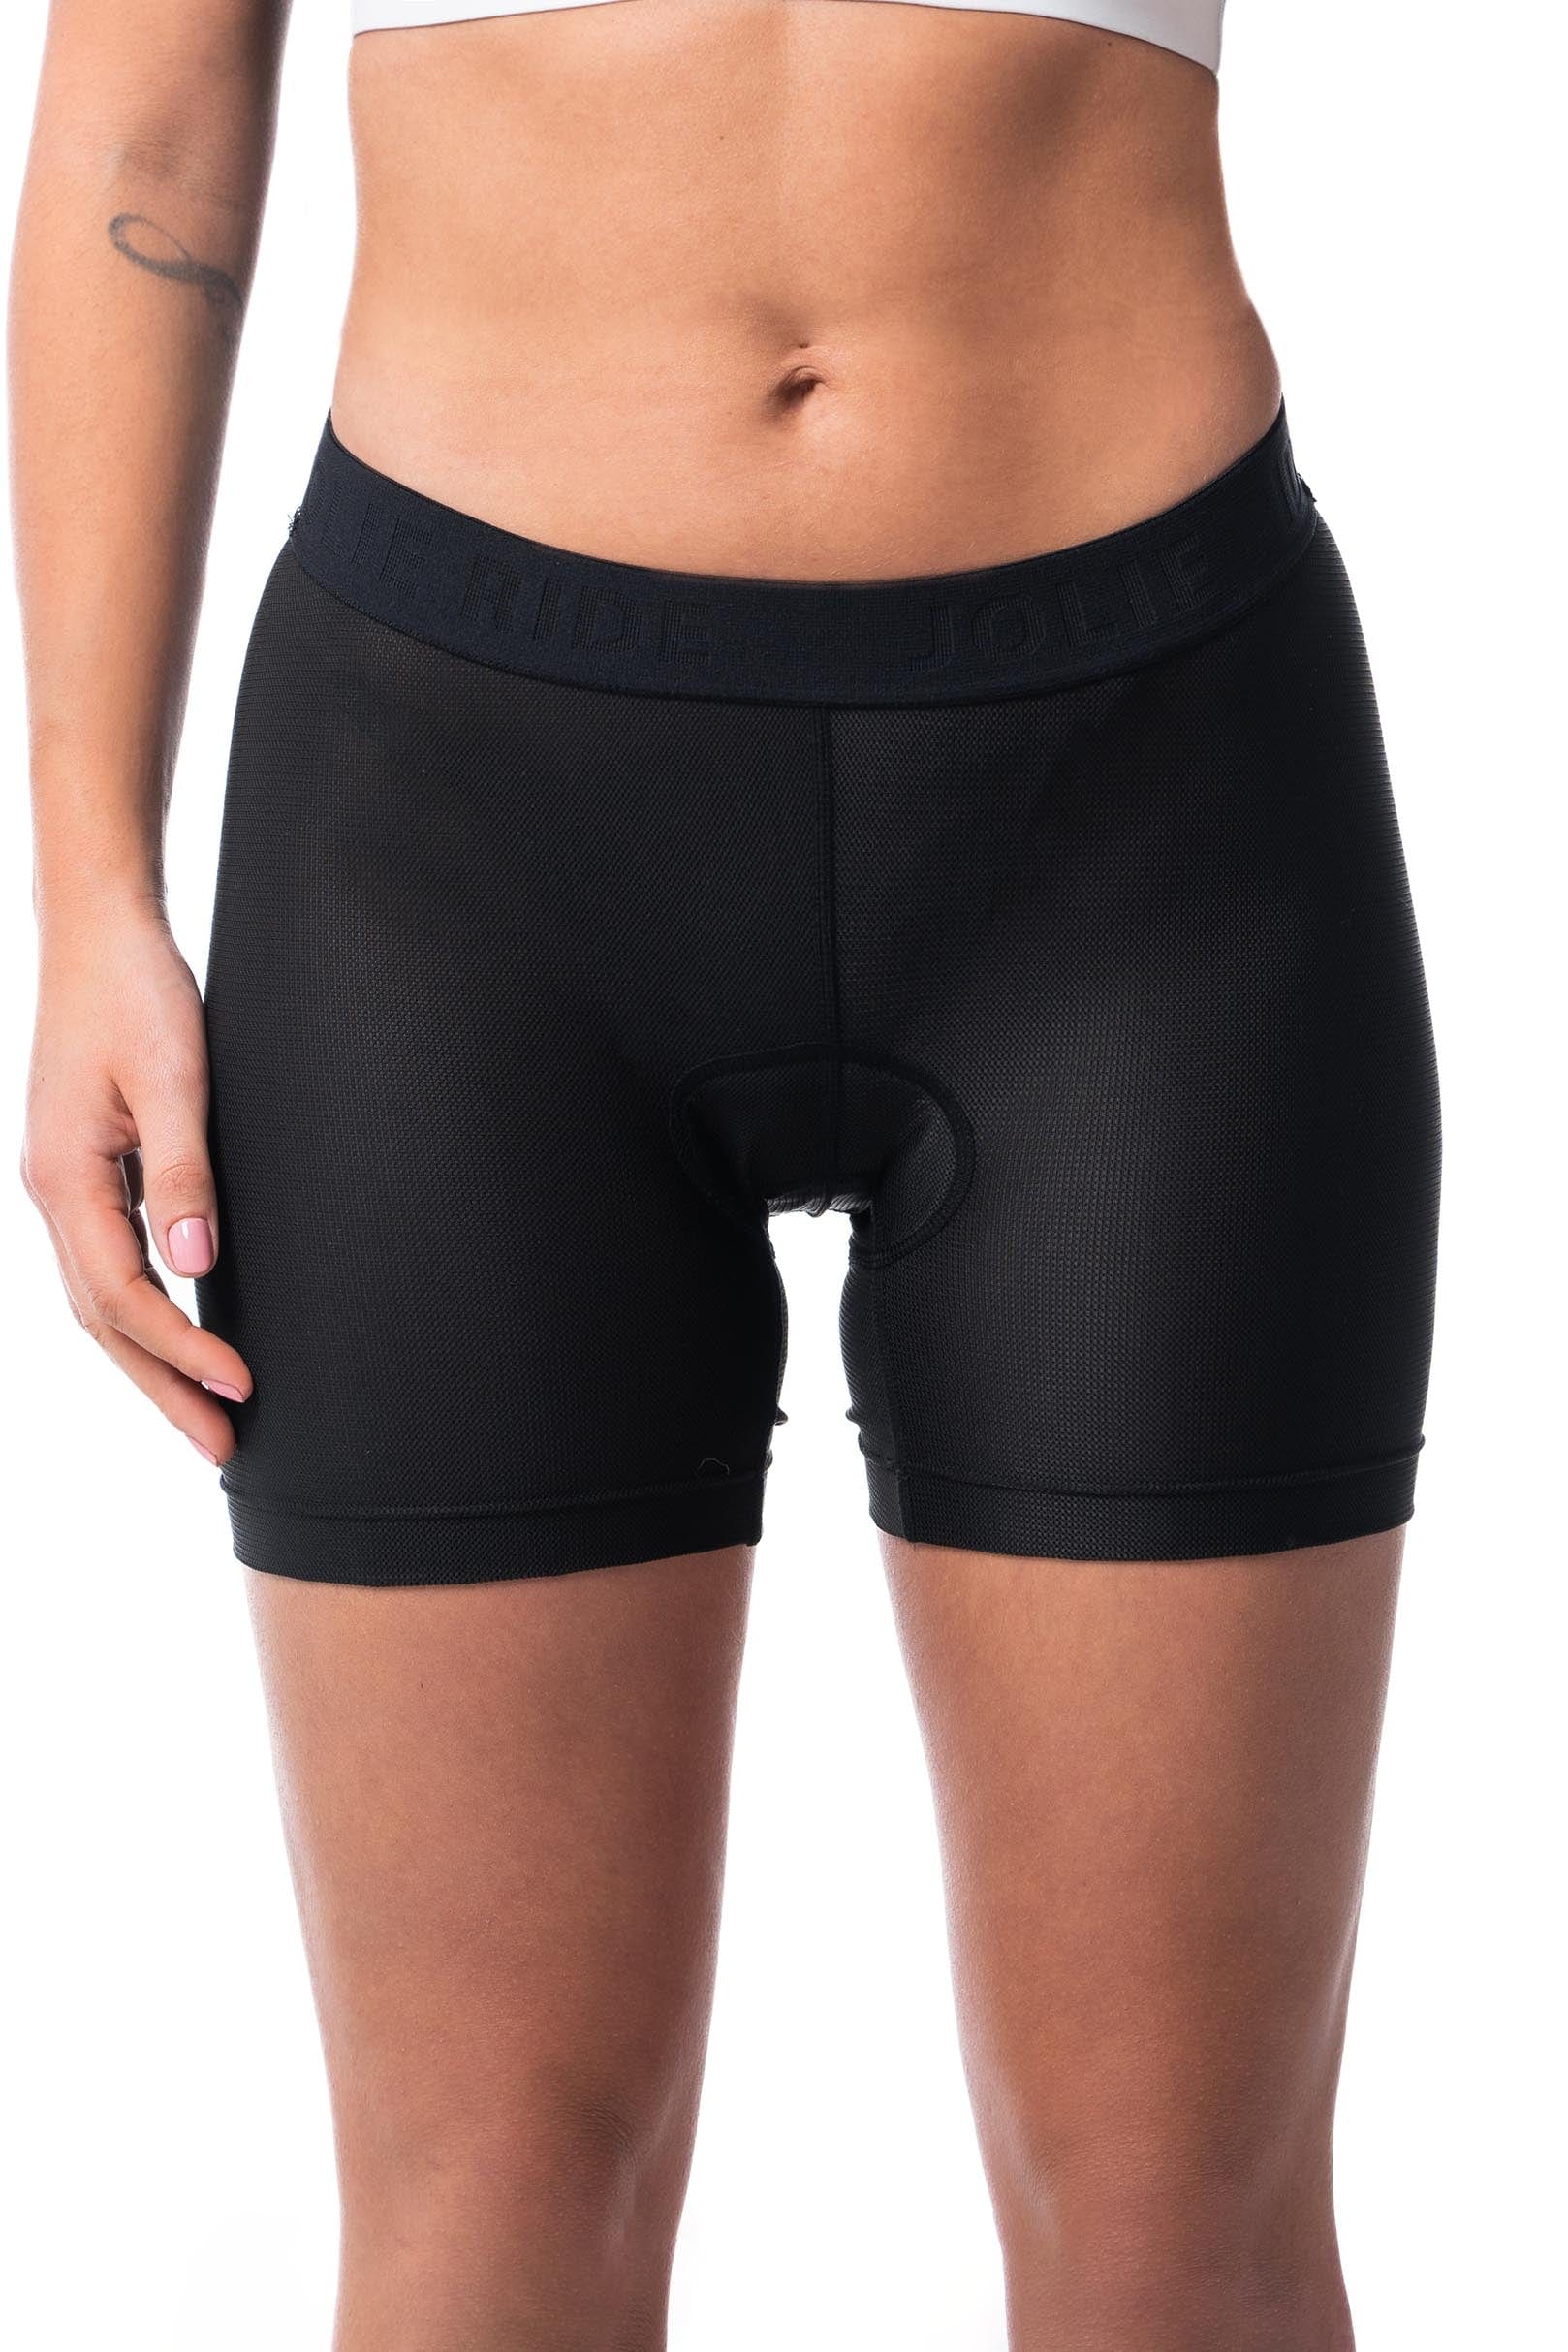 JolieRide Cycling shorts liner cycling shorts for comfortable and dry wear